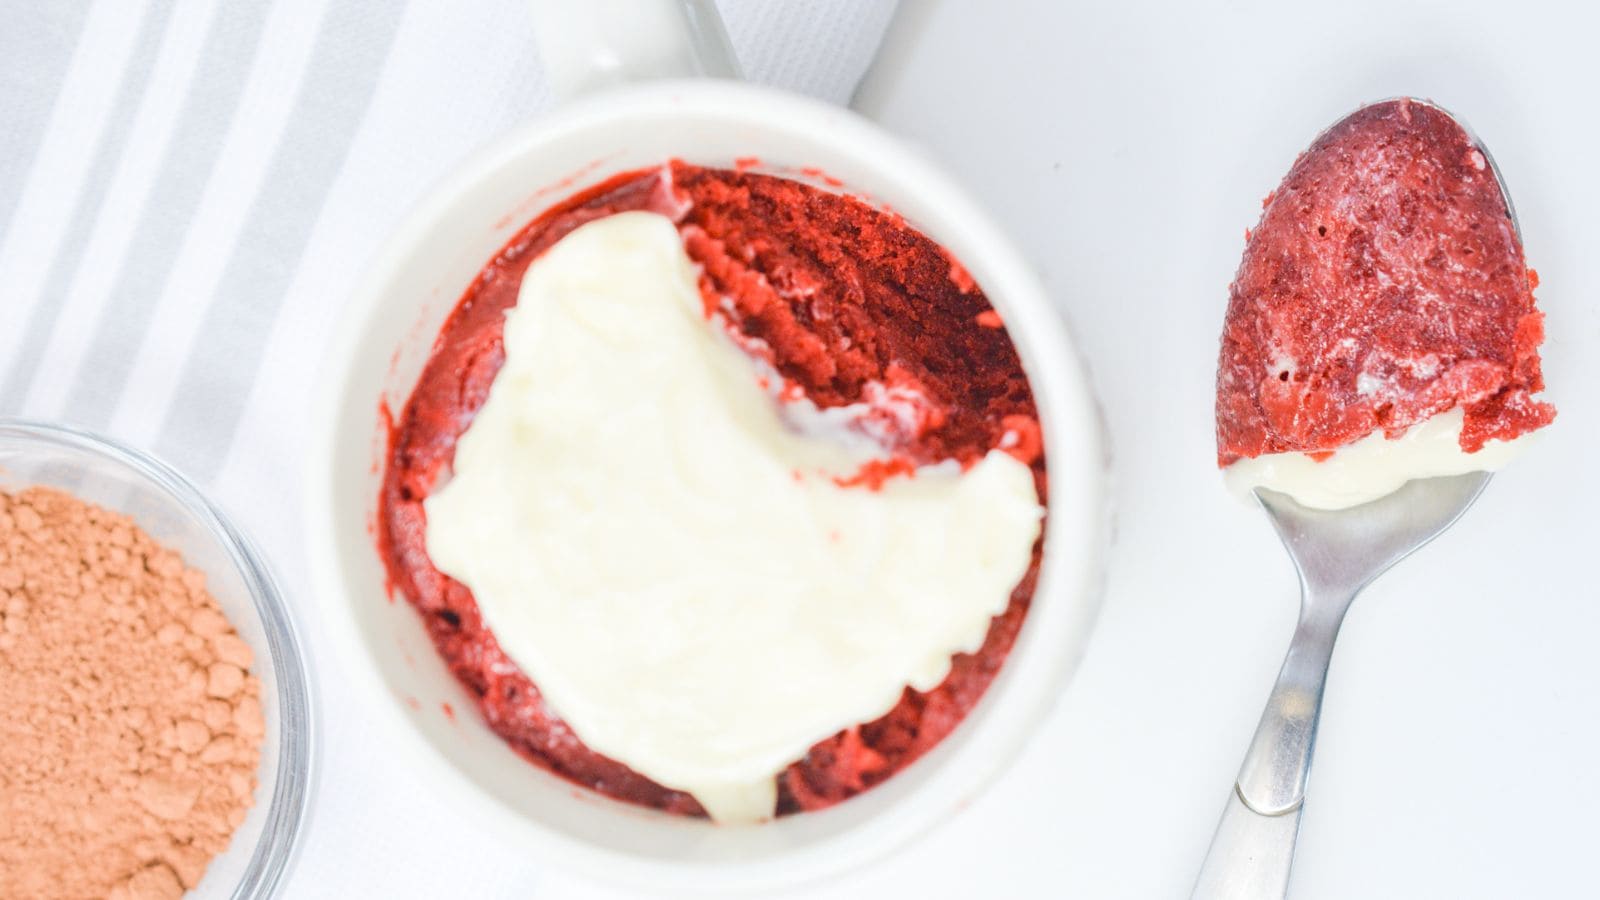 Red velvet cake with a layer of cream cheese frosting in a white ramekin, next to a spoon with a bite taken out, on a white background.